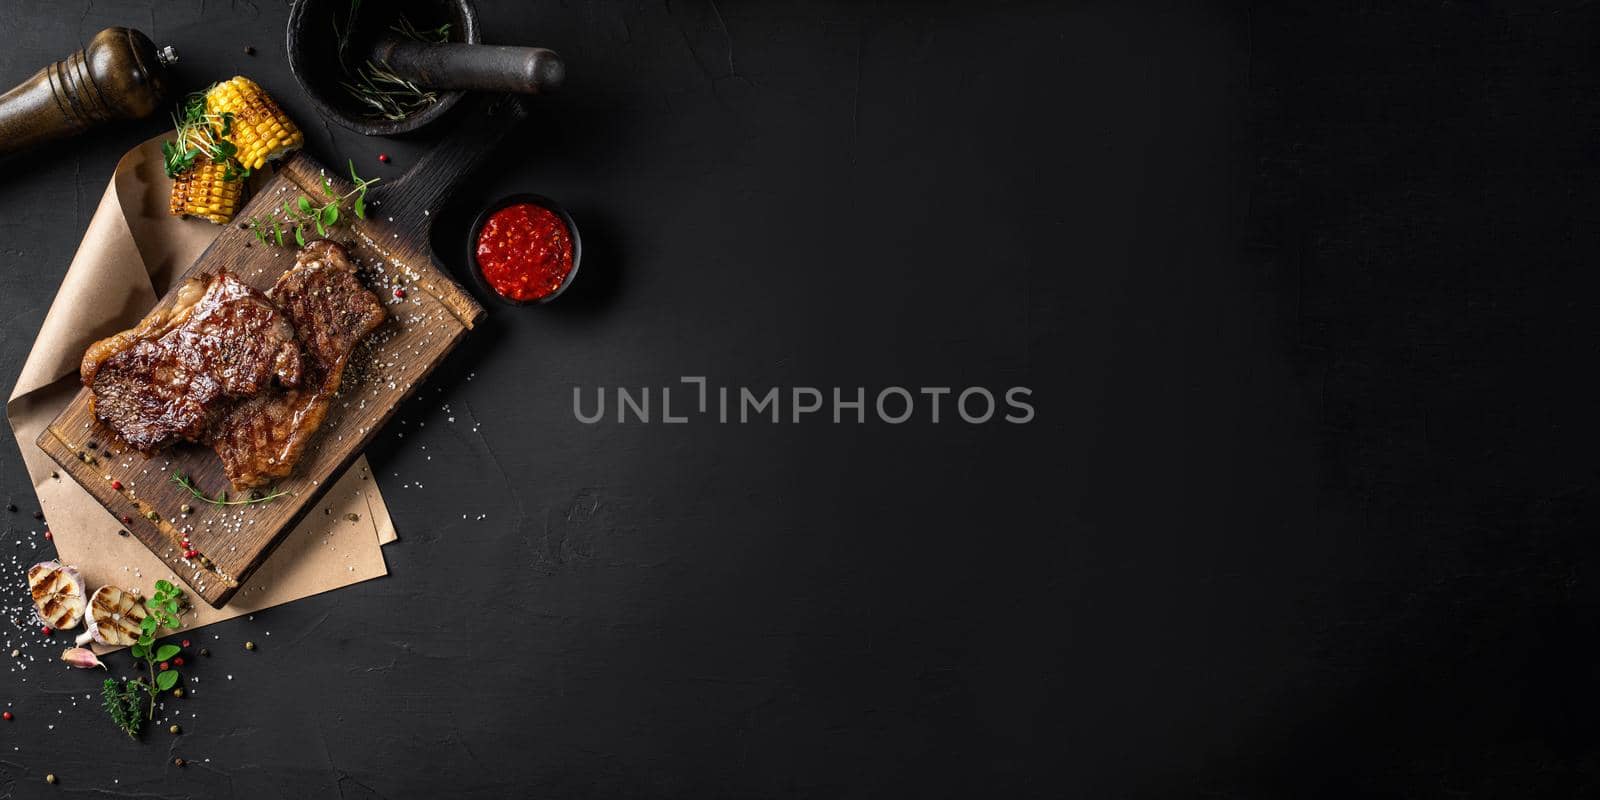 Fried sappy steaks with herbs and spices on a wooden board, parchment, grilled garlic and corn, sprouts, spice chopper, sauce in a small dark bowl, mortar with pestle on a black background. Cooking, restaurant concept. Close-up shot. Top view. Dry aged